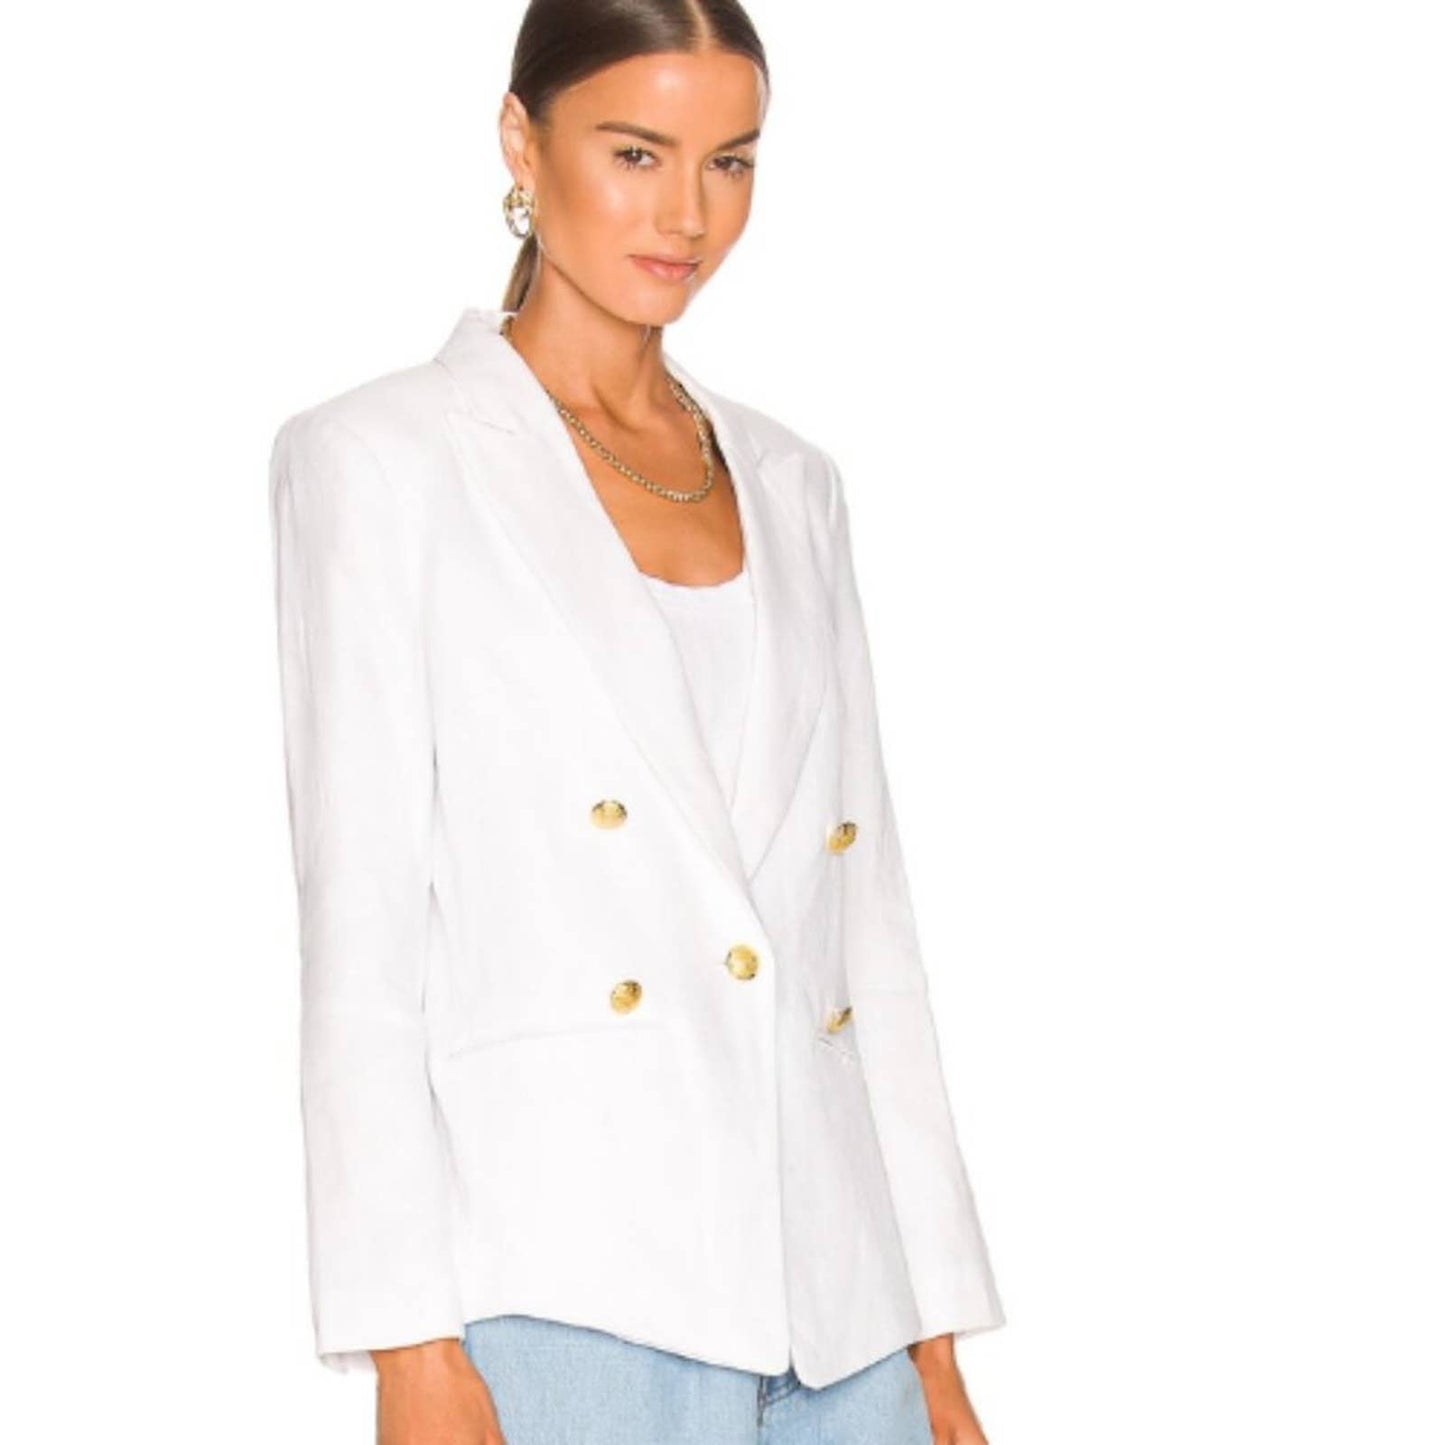 Central Park West Frankie Double Breasted Blazer in White NWT Size Medium